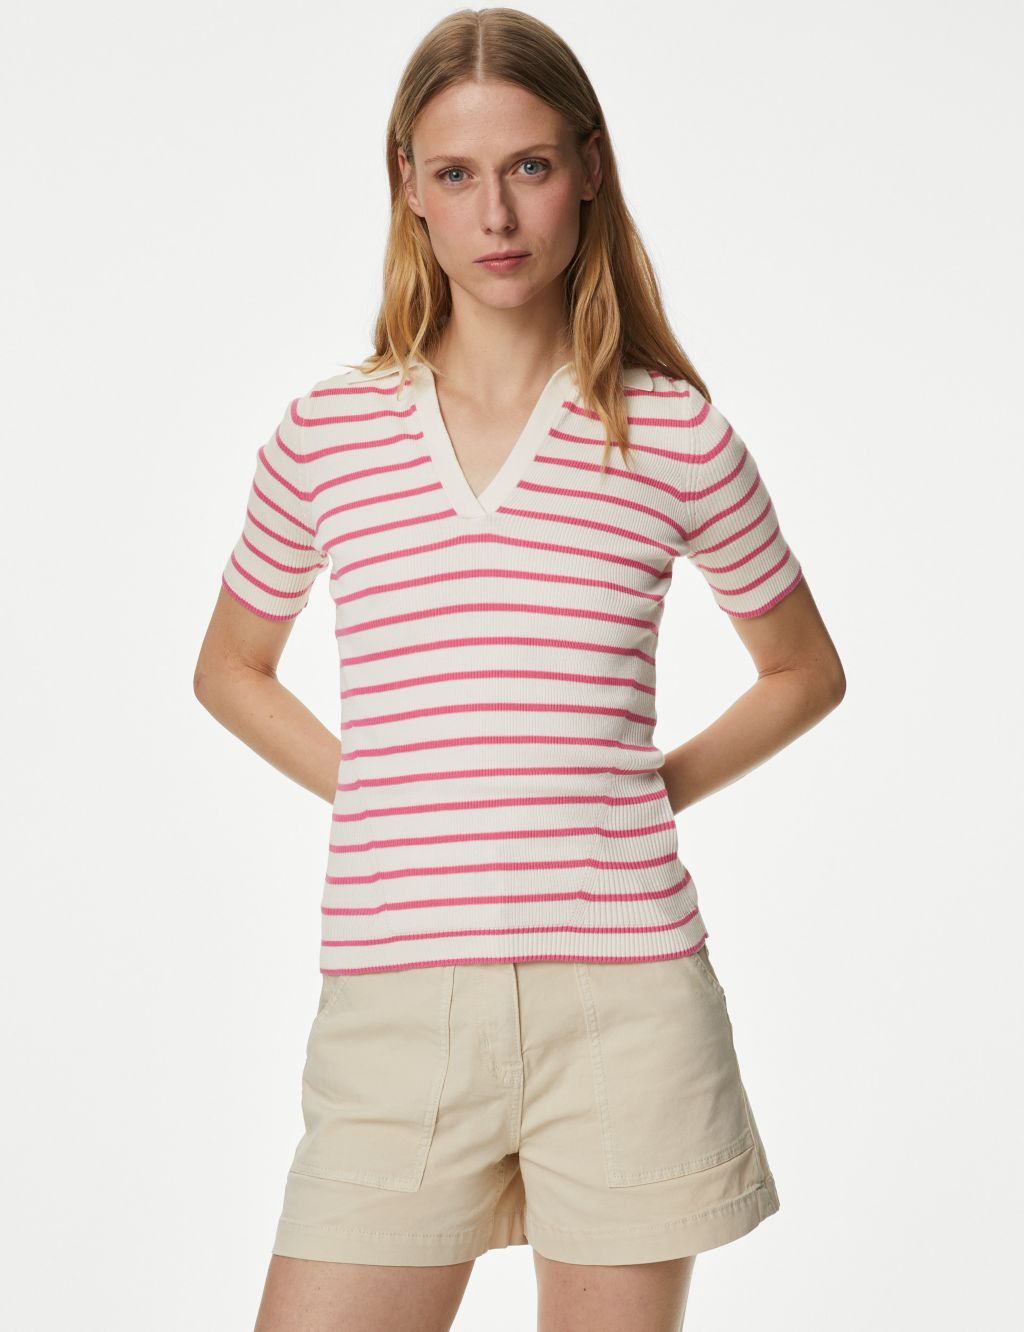 Cotton Rich Striped Collared Knitted Top image 2